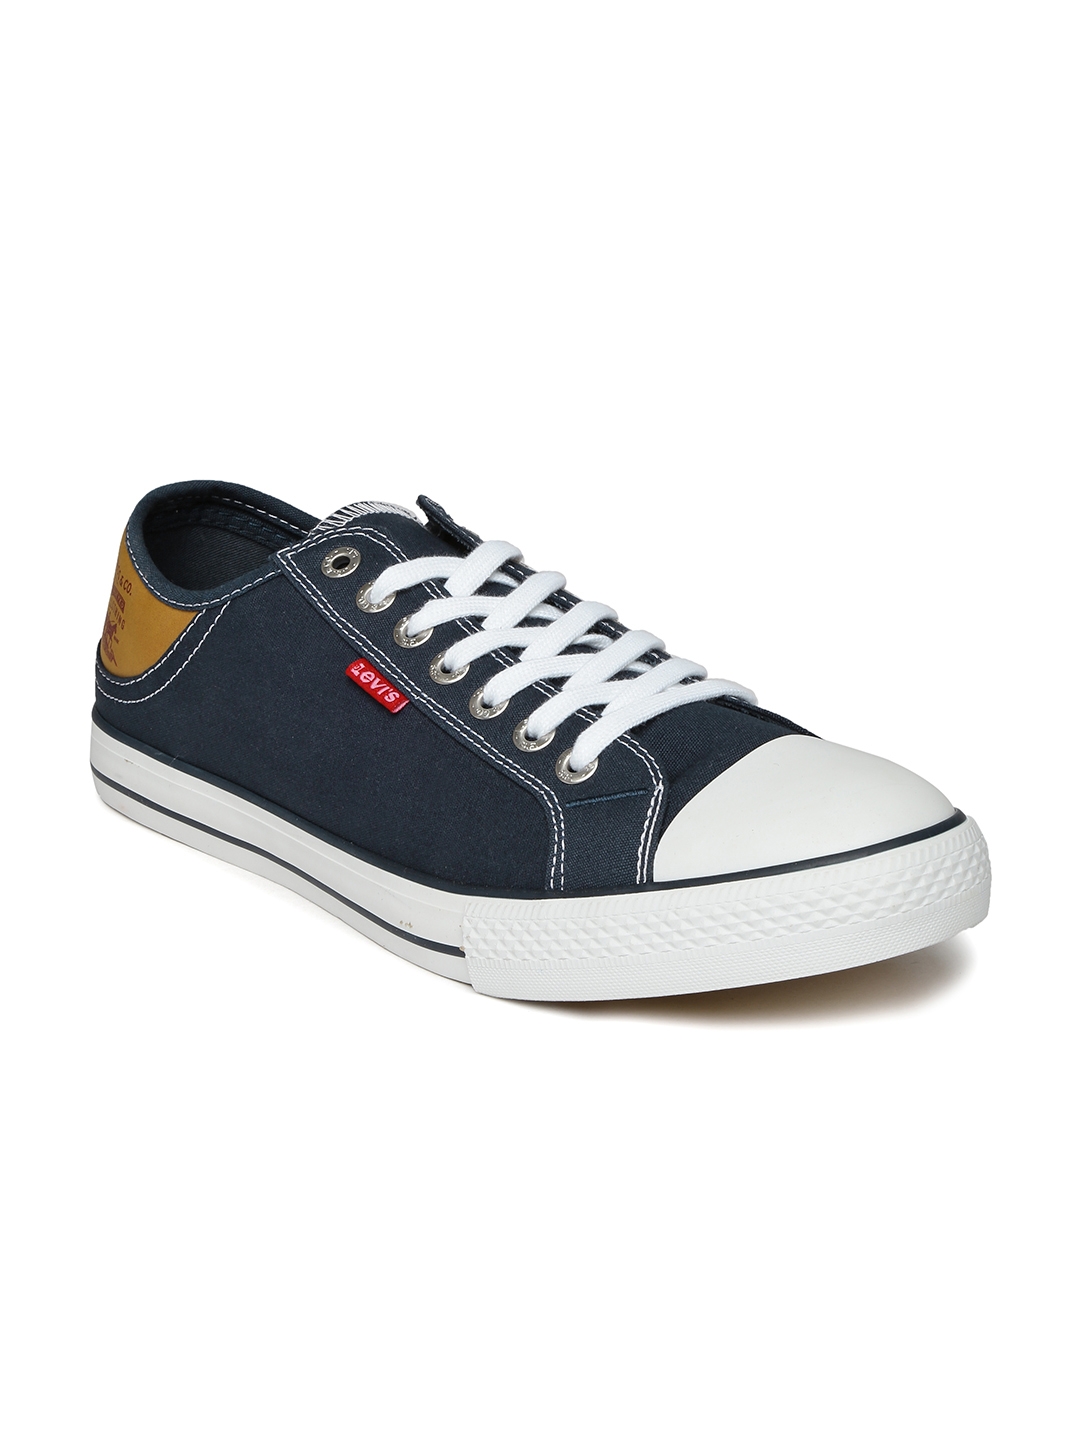 Buy Levis Men Navy Casual Shoes - Casual Shoes for Men 978676 | Myntra